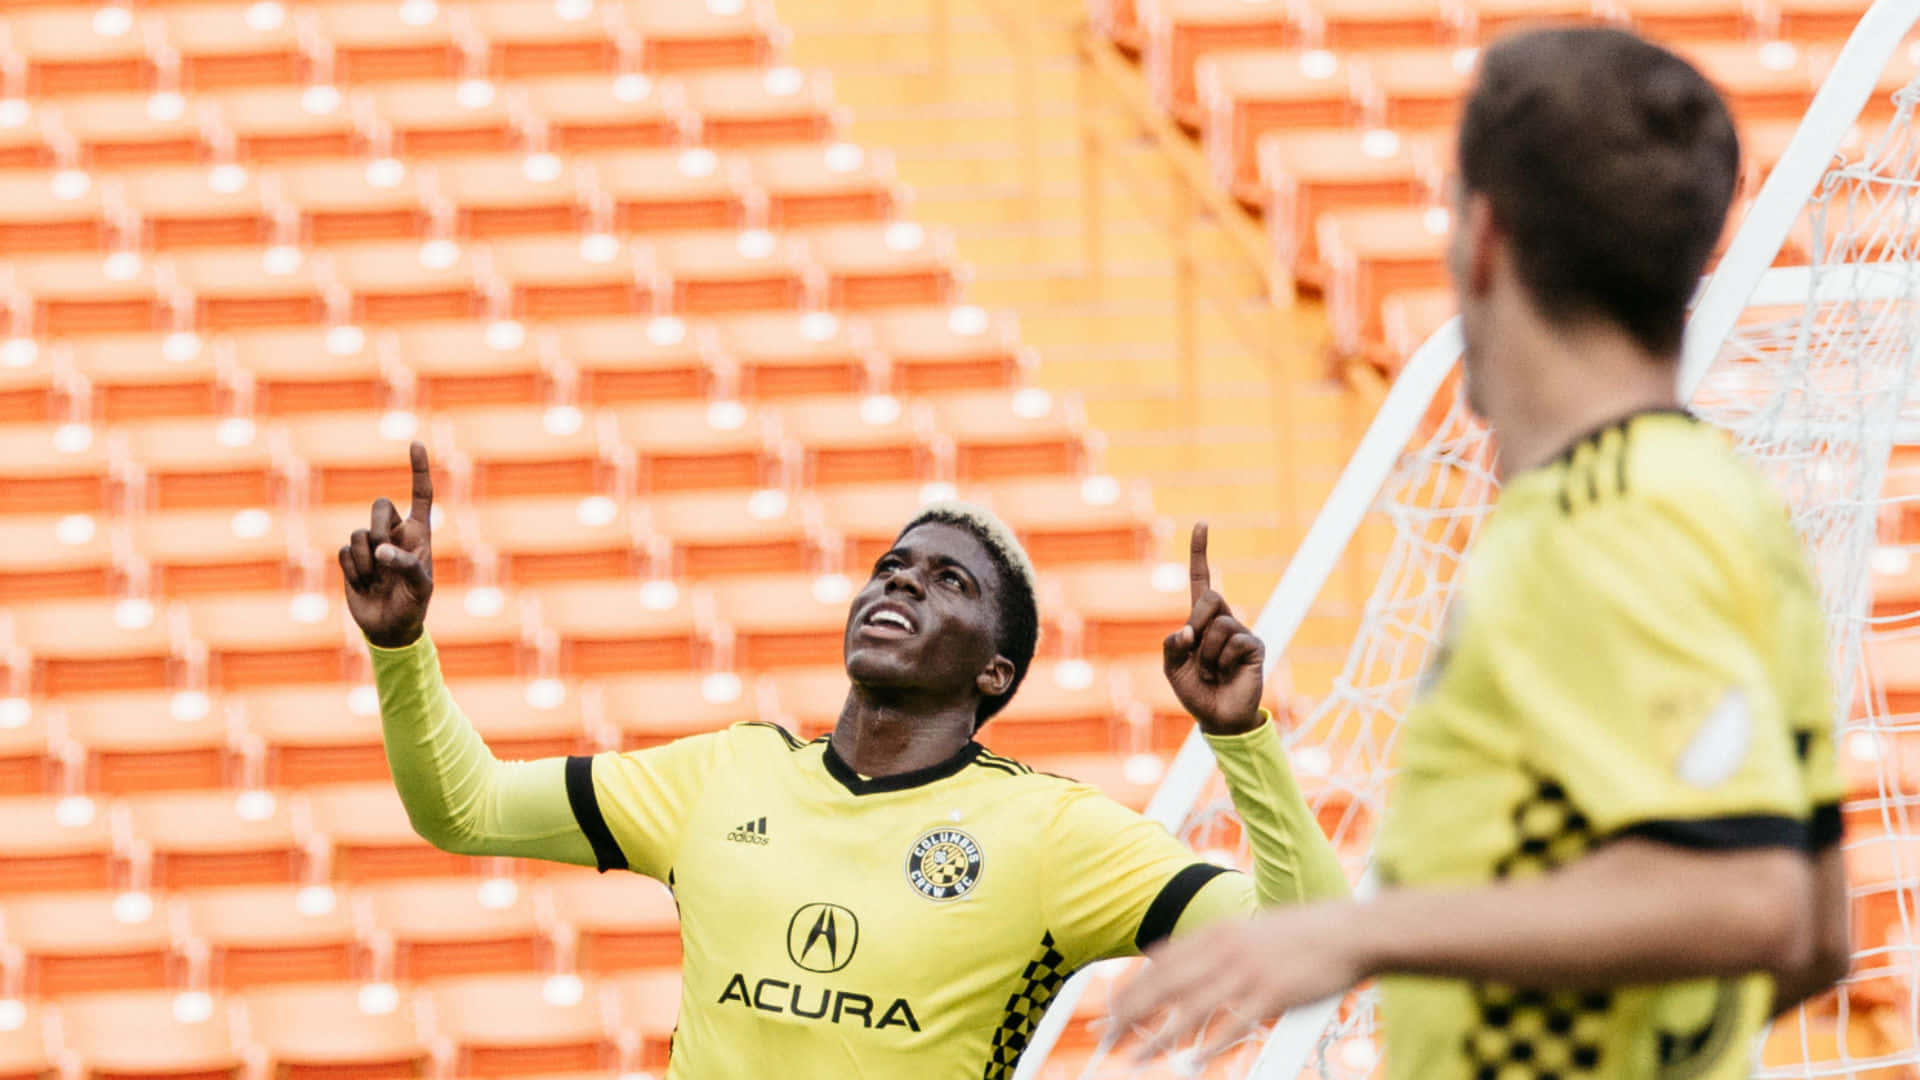 (context: This Could Be A Potential Caption For A Wallpaper Featuring Gyasi Zardes Of Columbus Crew, Pointing Upwards.) Wallpaper